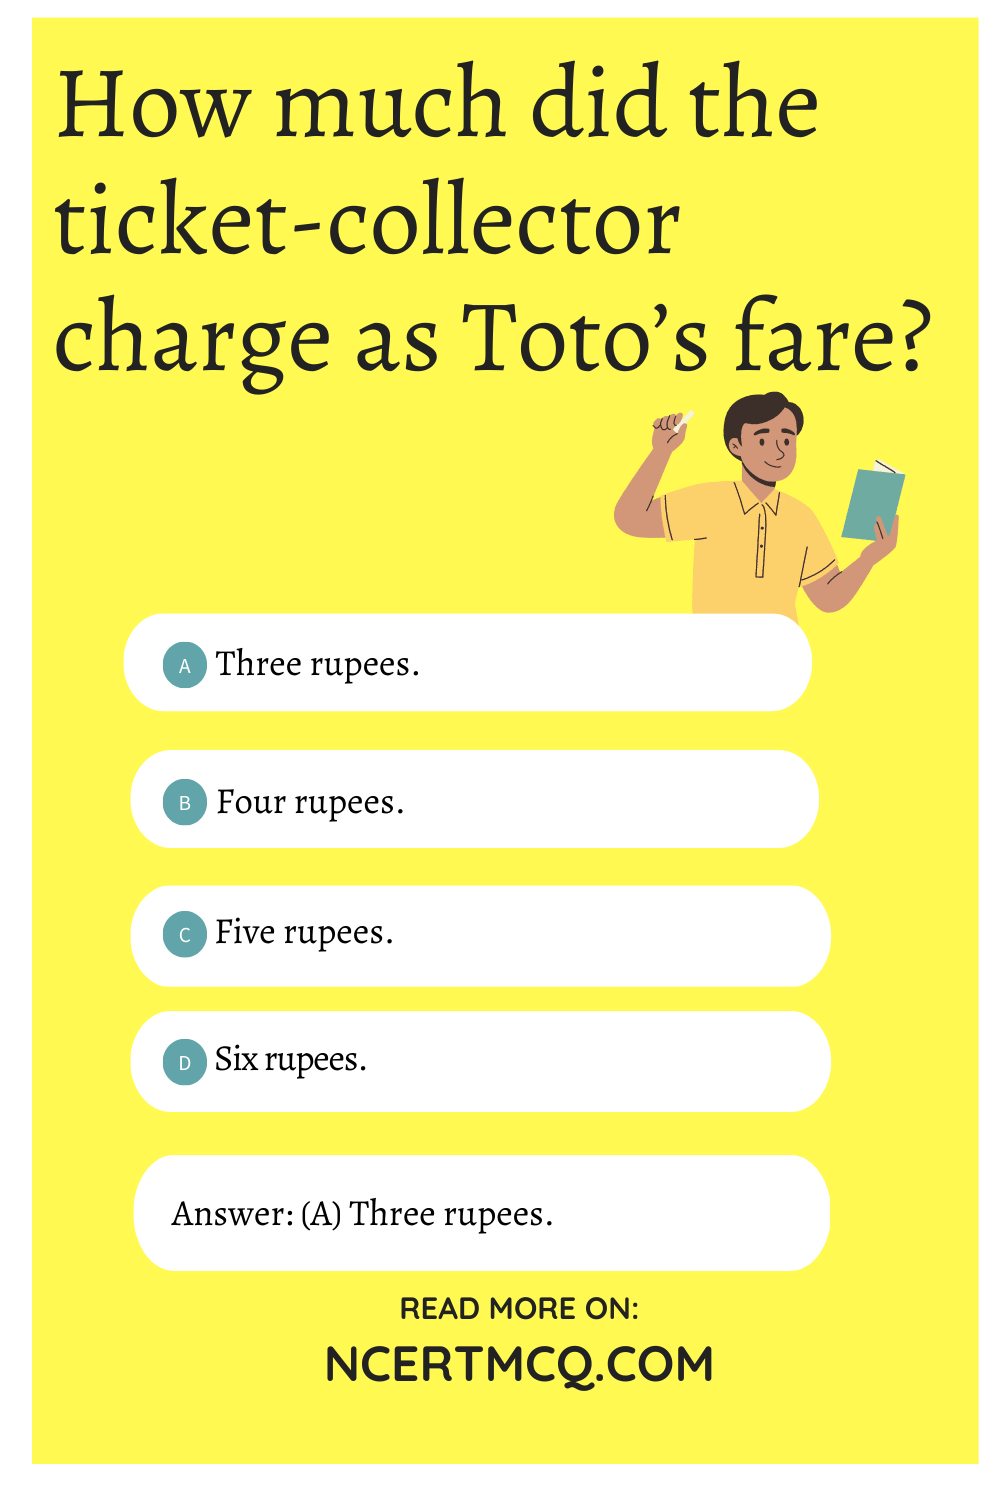 How much did the ticket-collector charge as Toto’s fare?